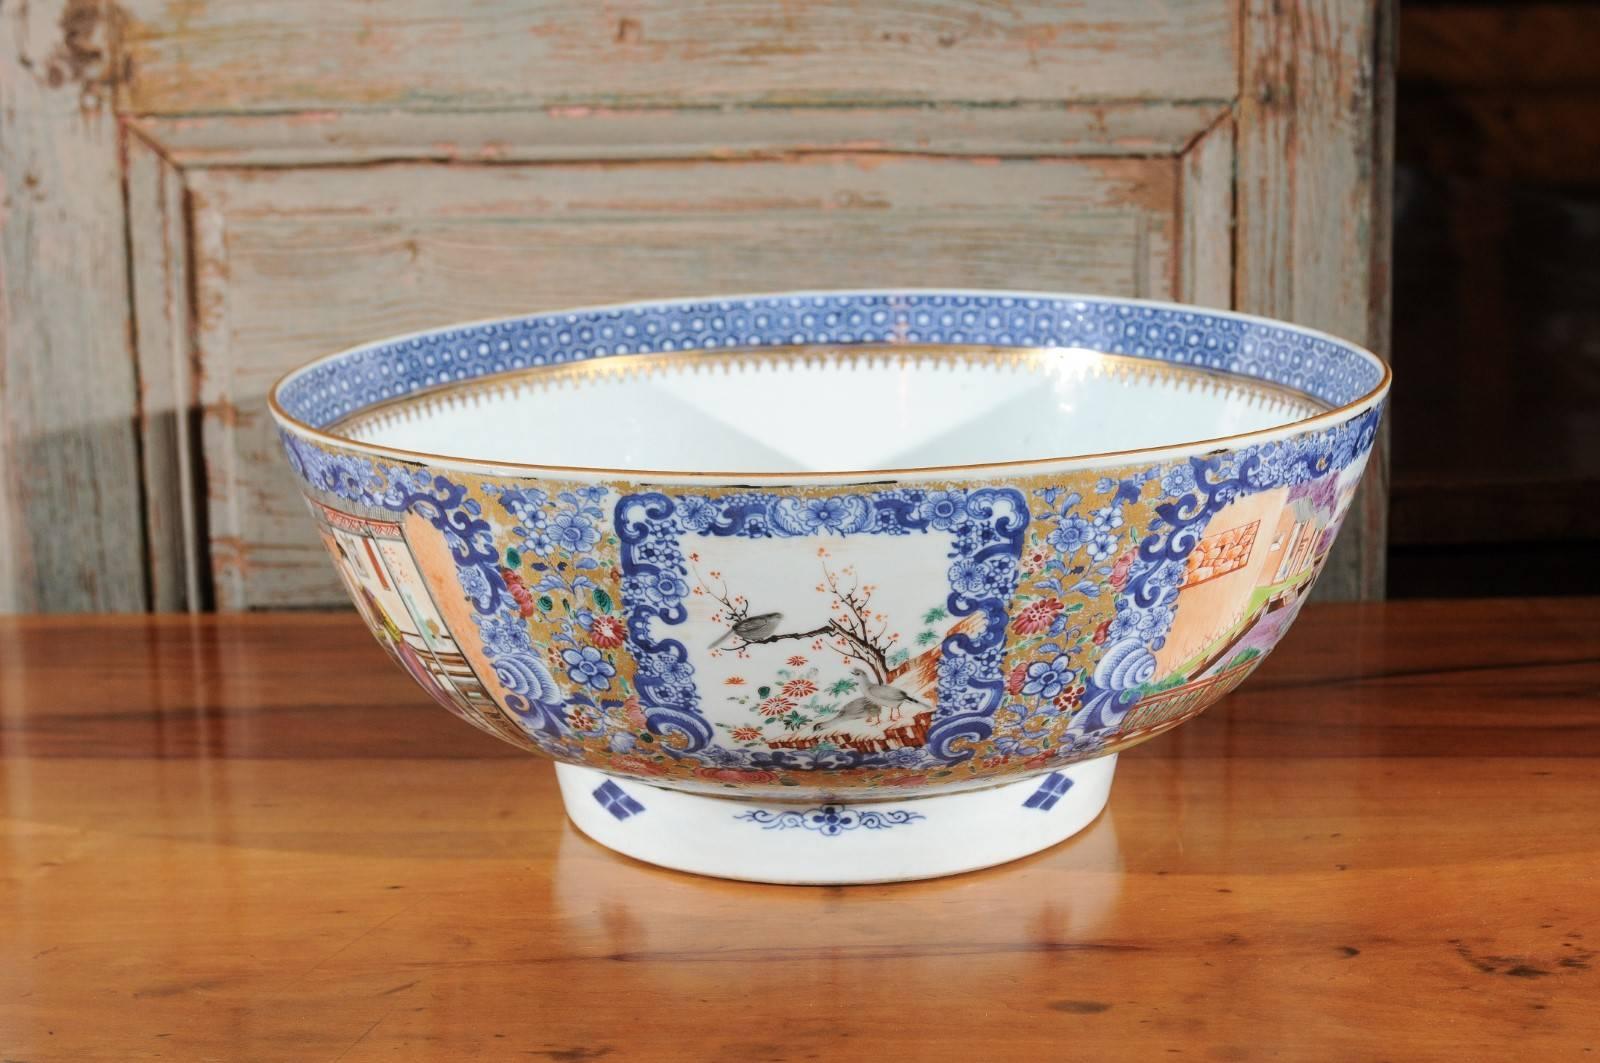 Large Chinese Export Punch Bowl in Mandarin Palette & Gilt Accents, ca. 1780 For Sale 3